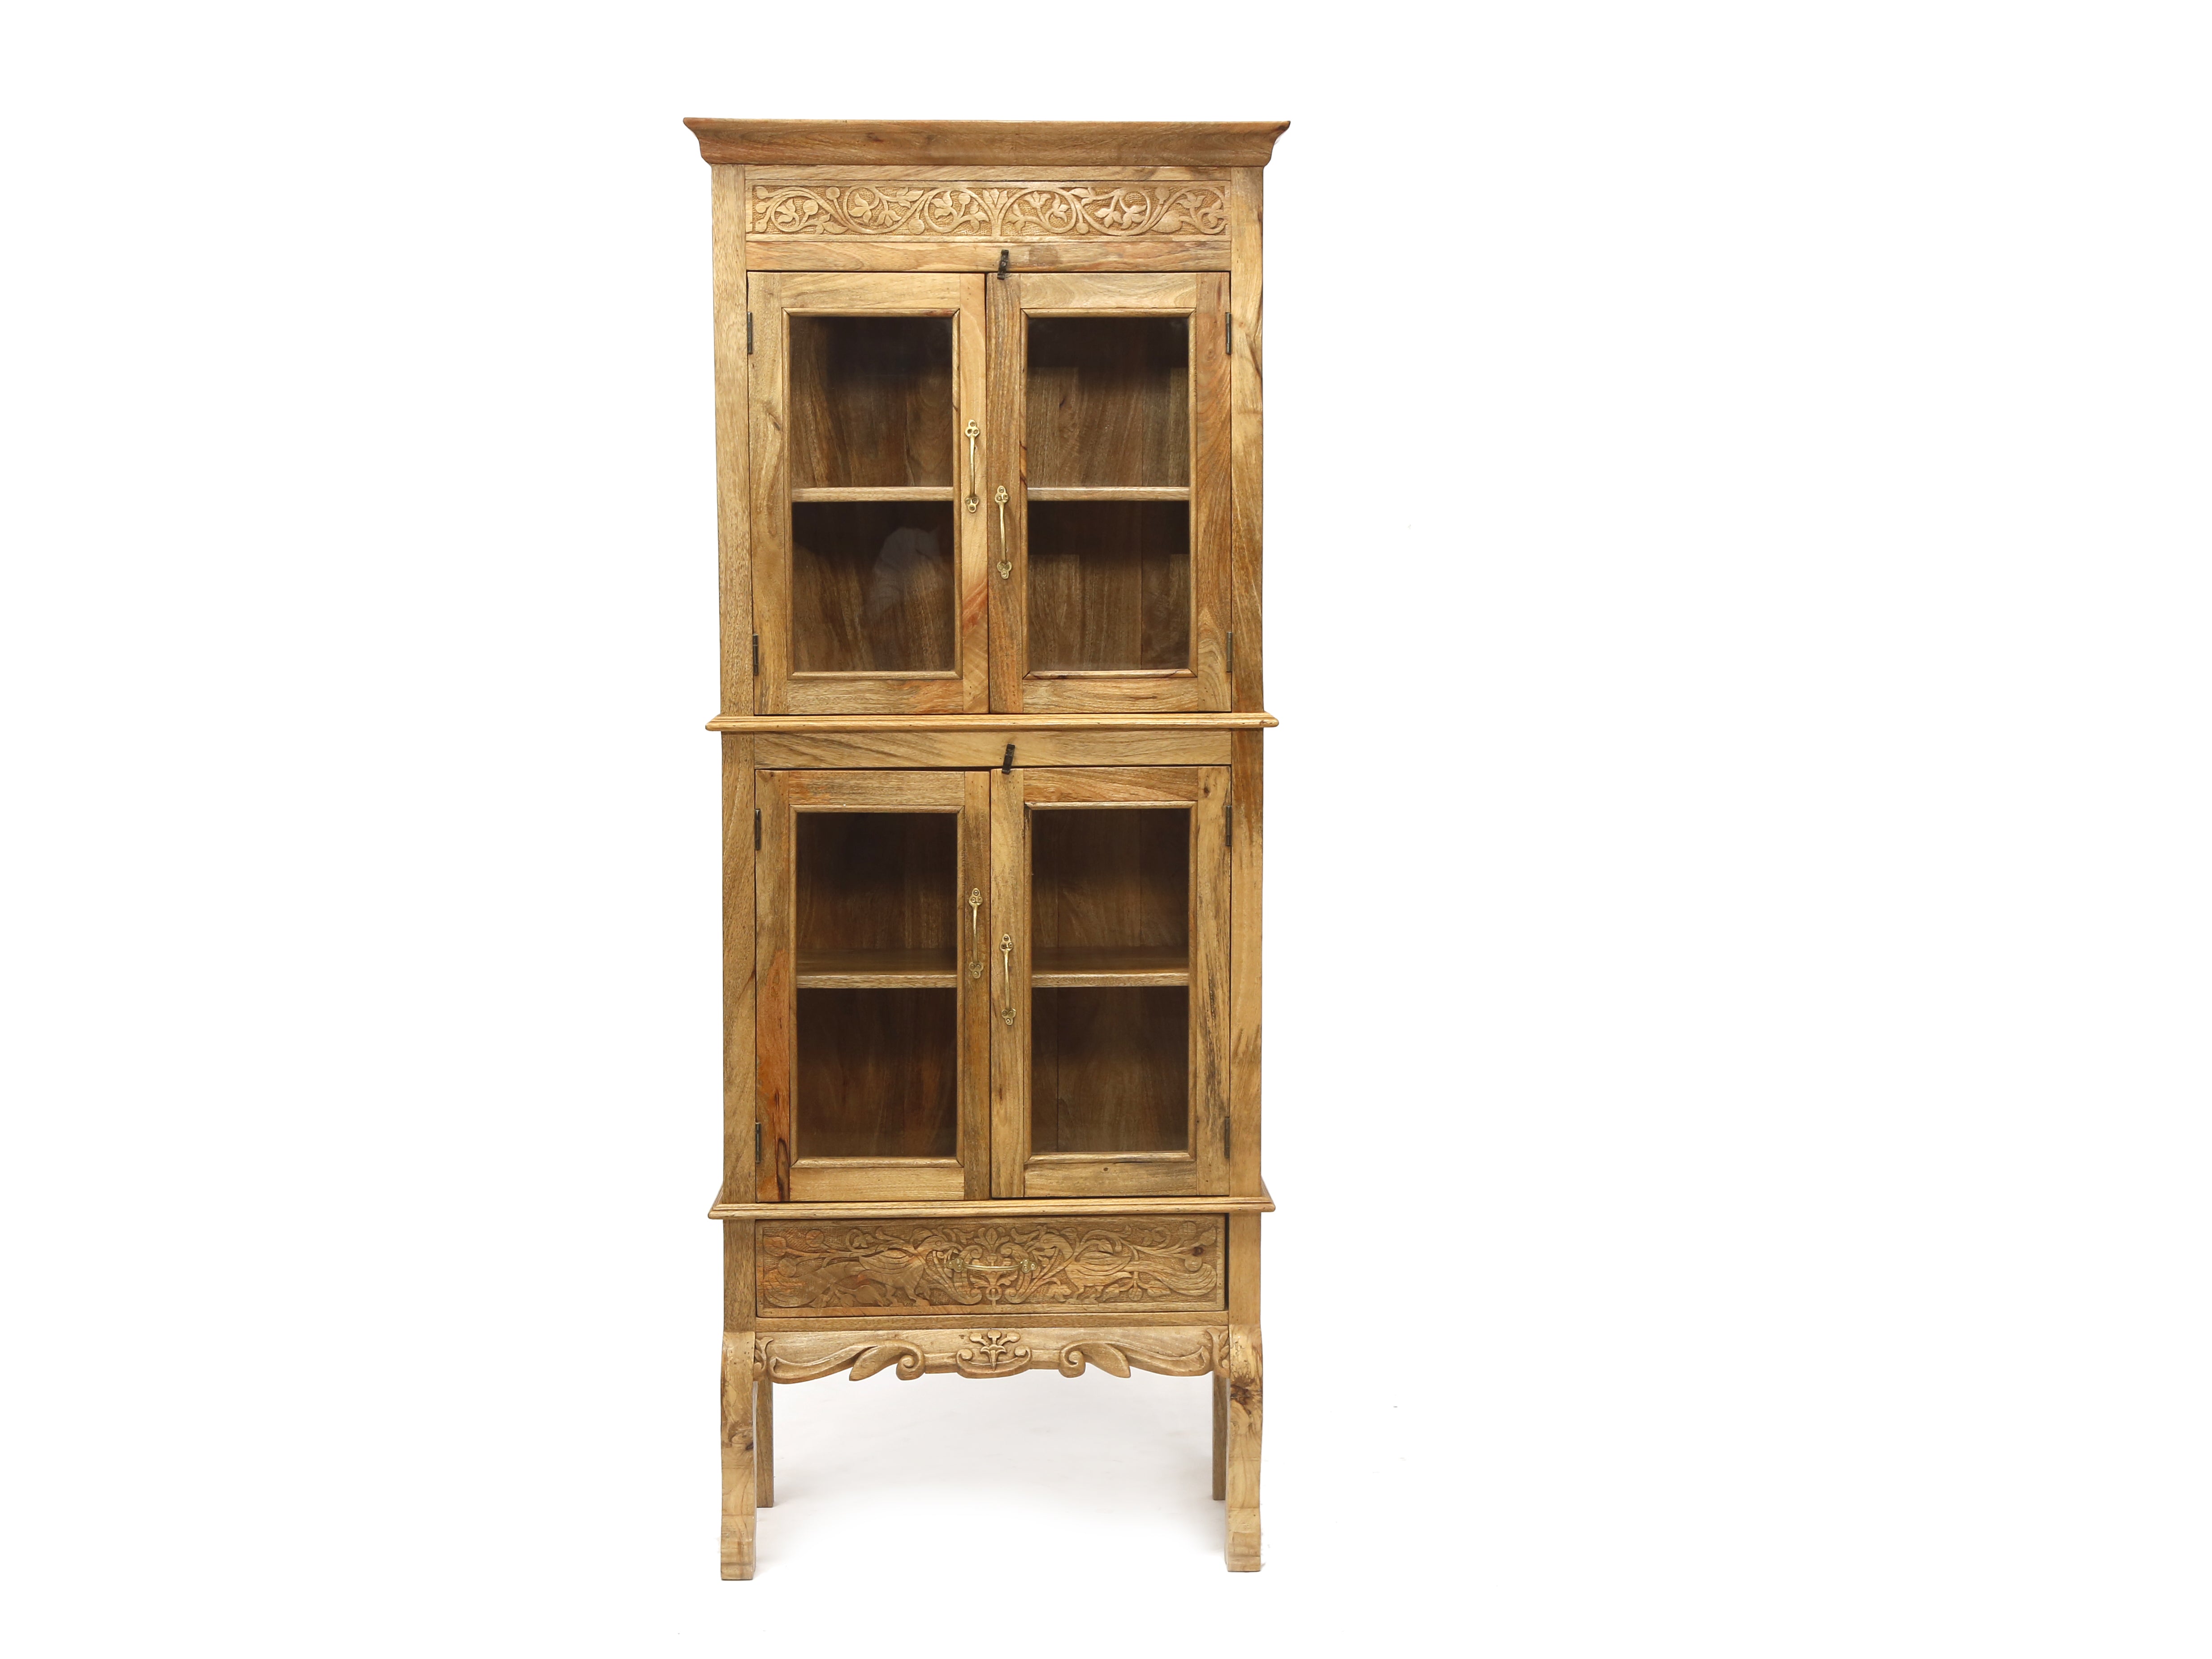 Wooden 2-Part Intricate Designed Cabinet Cupboard